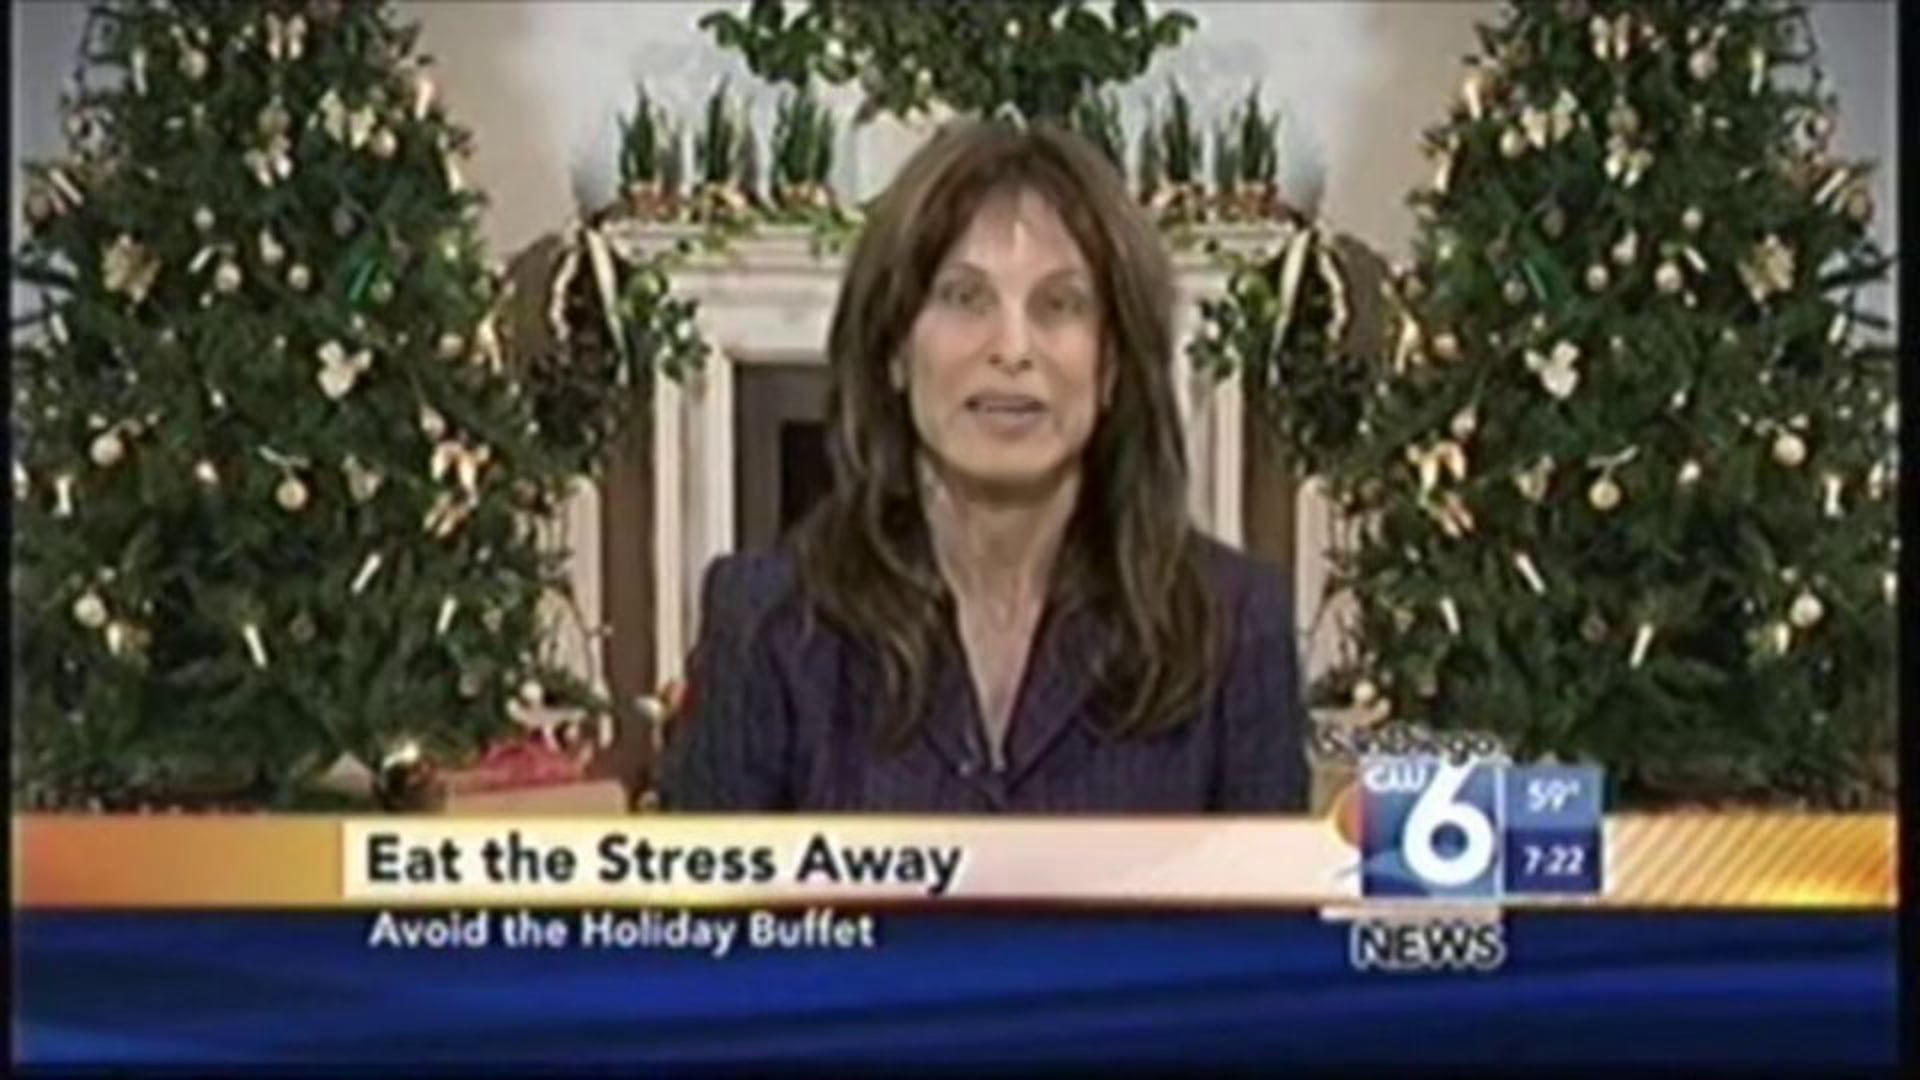 Dieting During the Holidays on XETV-TV.wmv